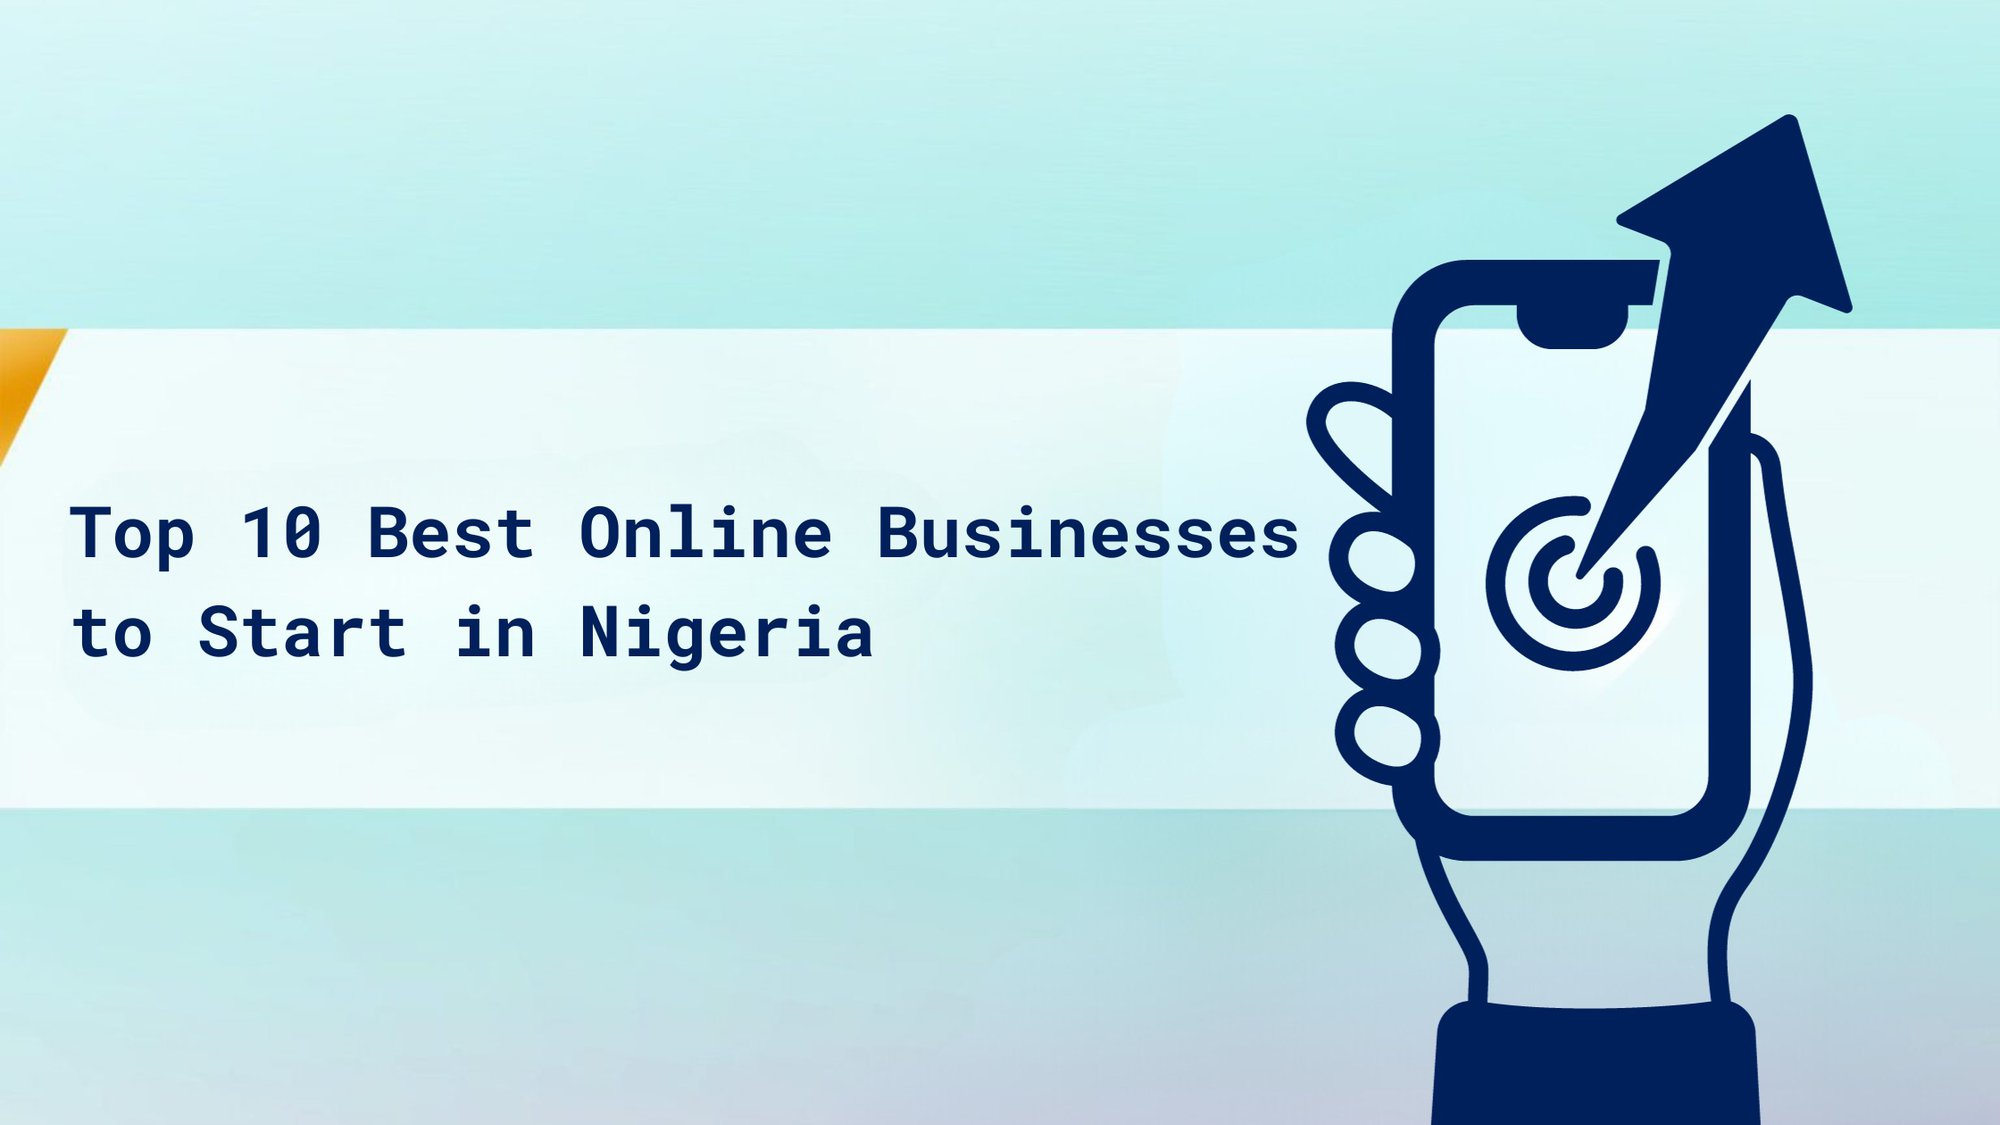 Top 10 Best Online Businesses to Start in Nigeria cover